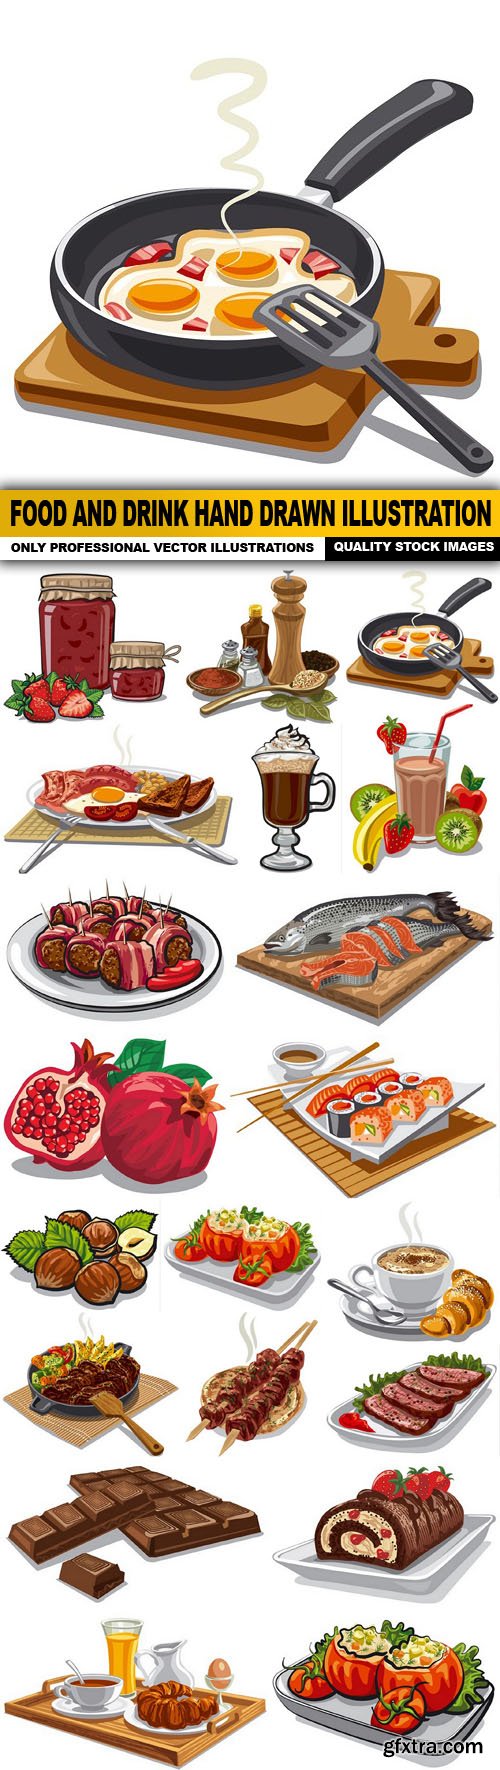 Food And Drink Hand Drawn Illustration - 20 Vector